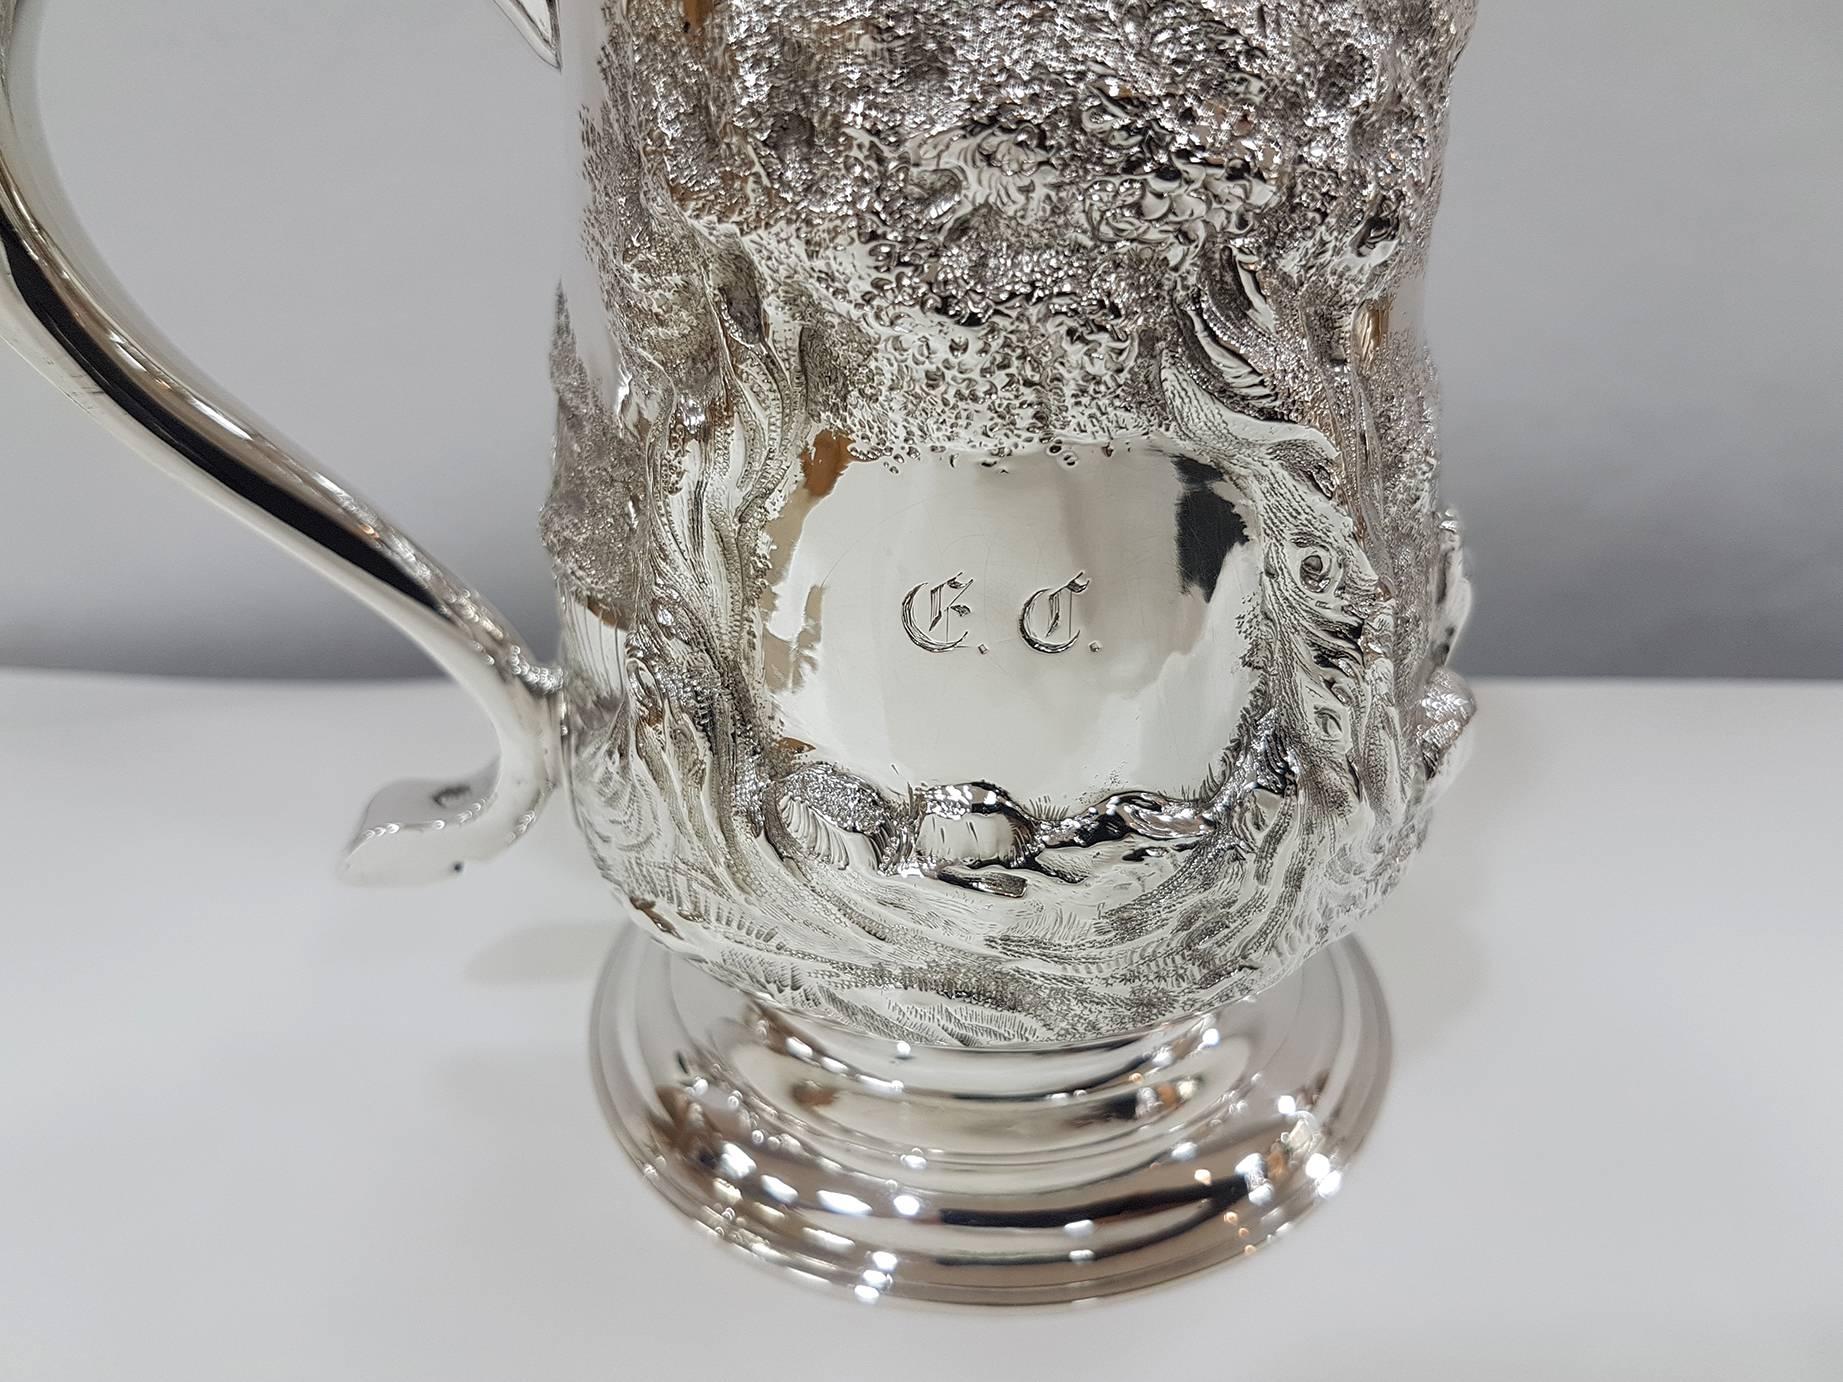 Hand-Crafted 19th Century Sterling Silver Footed Tankard with Countryside Scene, circa 1748